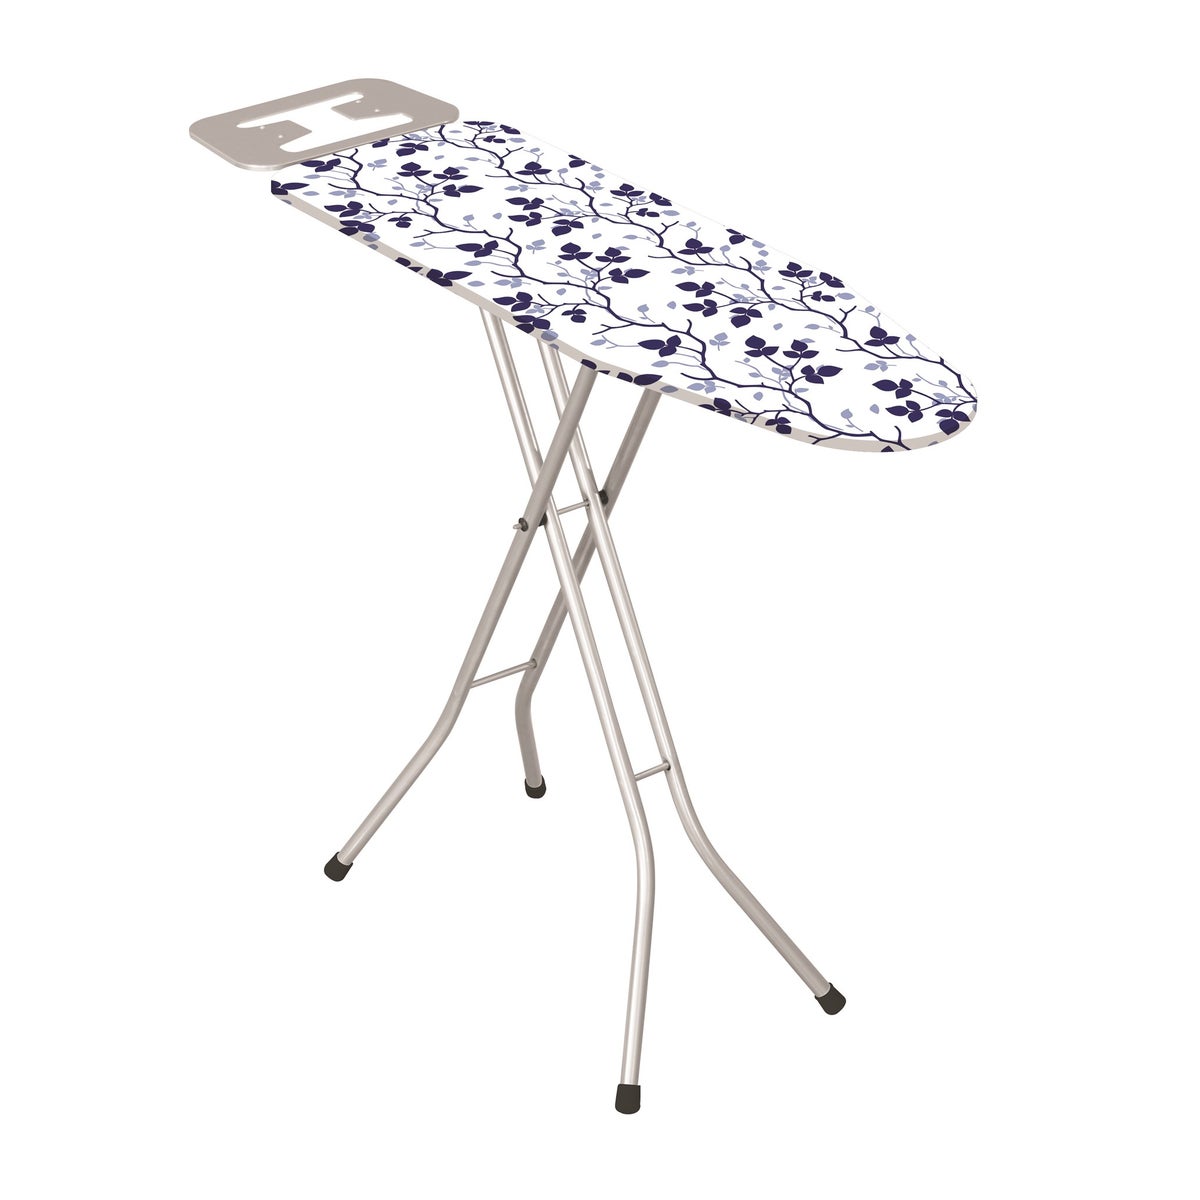 36" x 12" Metal Mesh Top Ironing Board with  Metal Iron Rest (6)